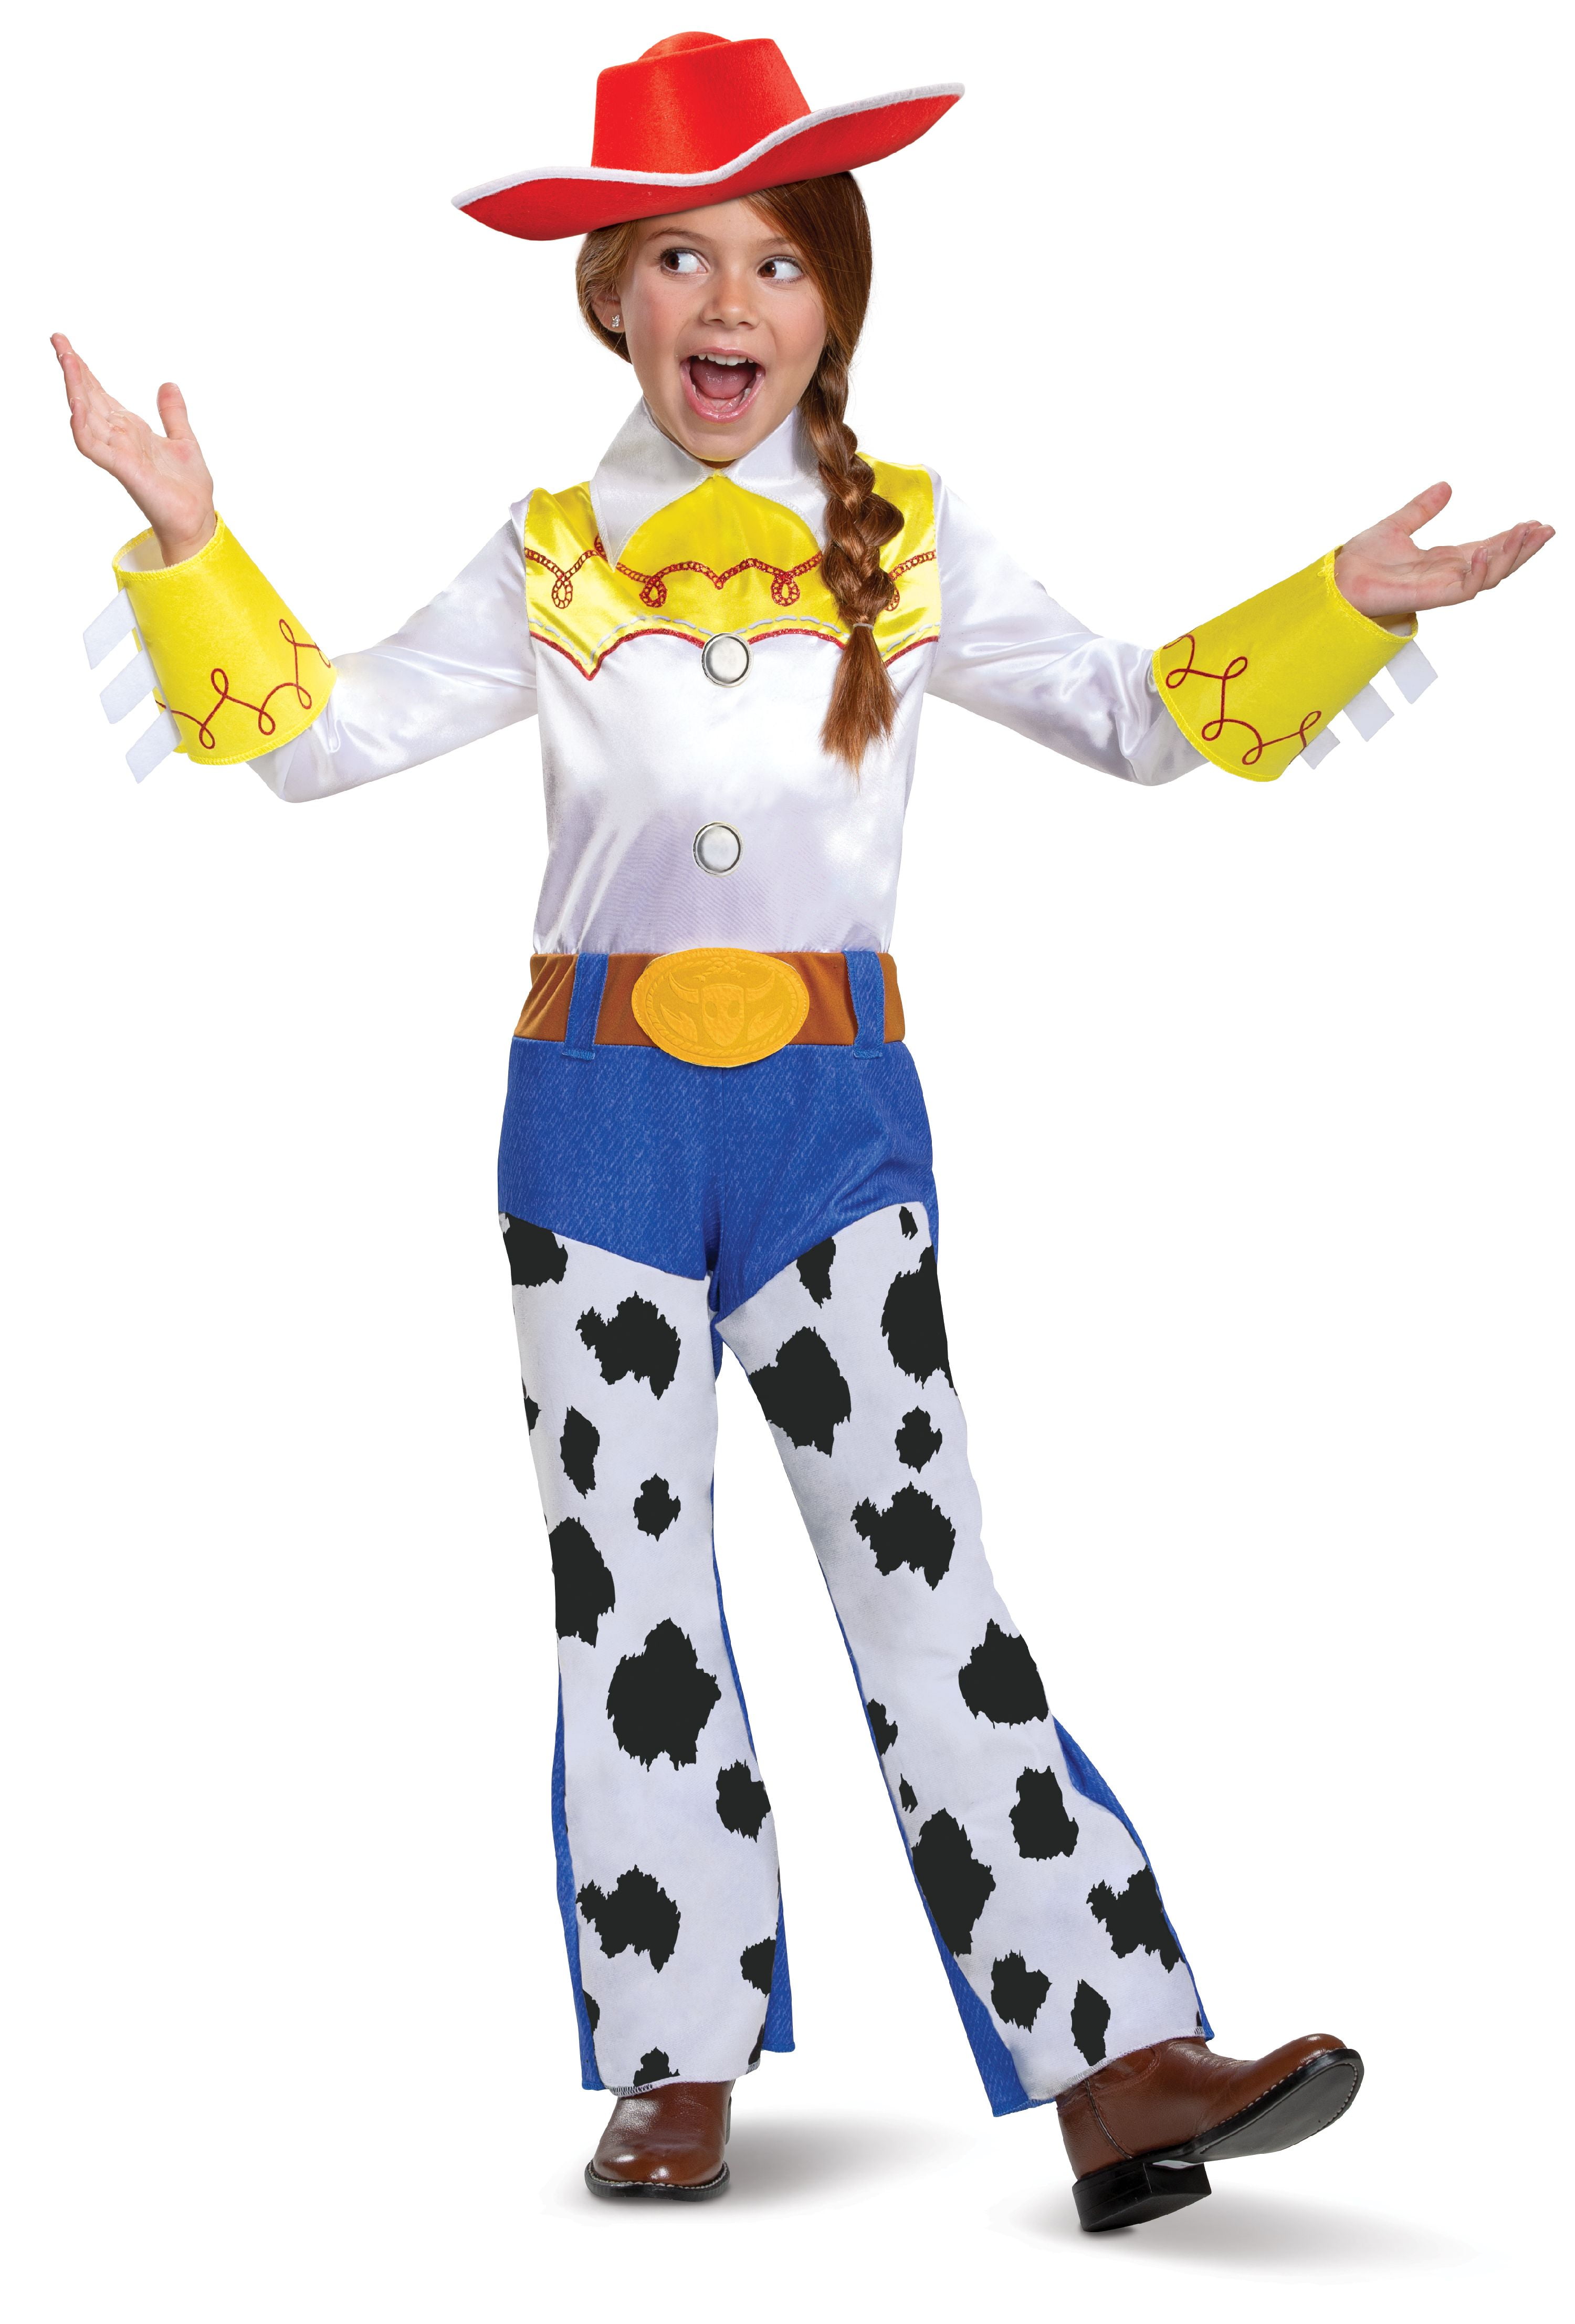 Disguise Toy Story Jessie Classic Girl's Halloween Fancy-Dress Costume for Child, Toddler 3T-4T